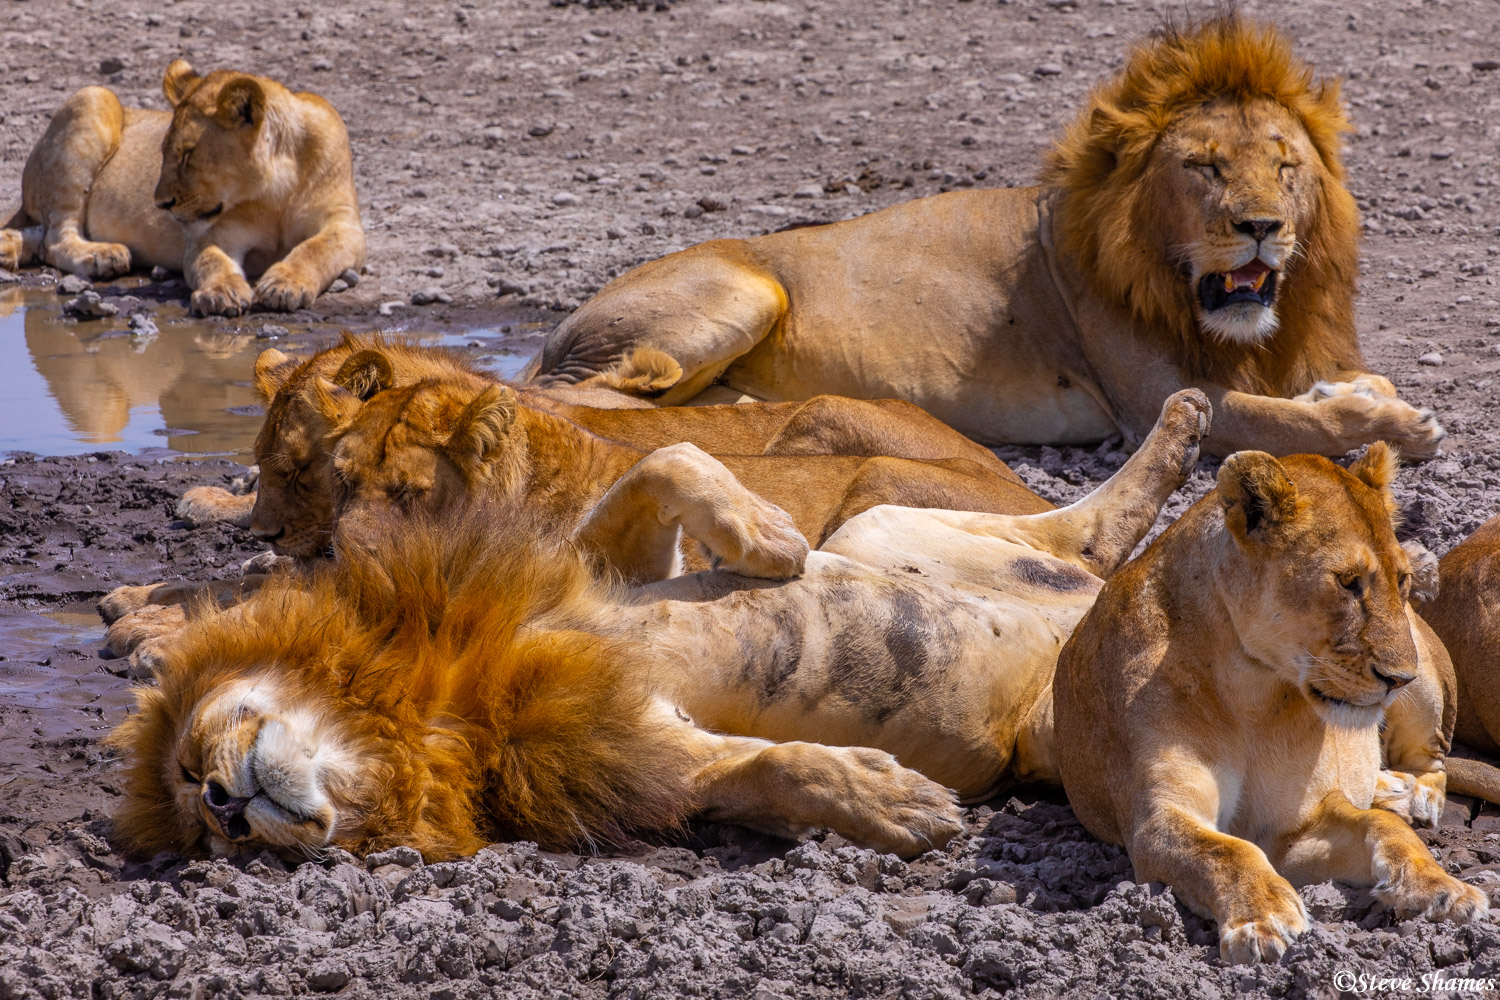 Lions lounging by the waterhole. They don't seem to be bothered by the heat of the day.